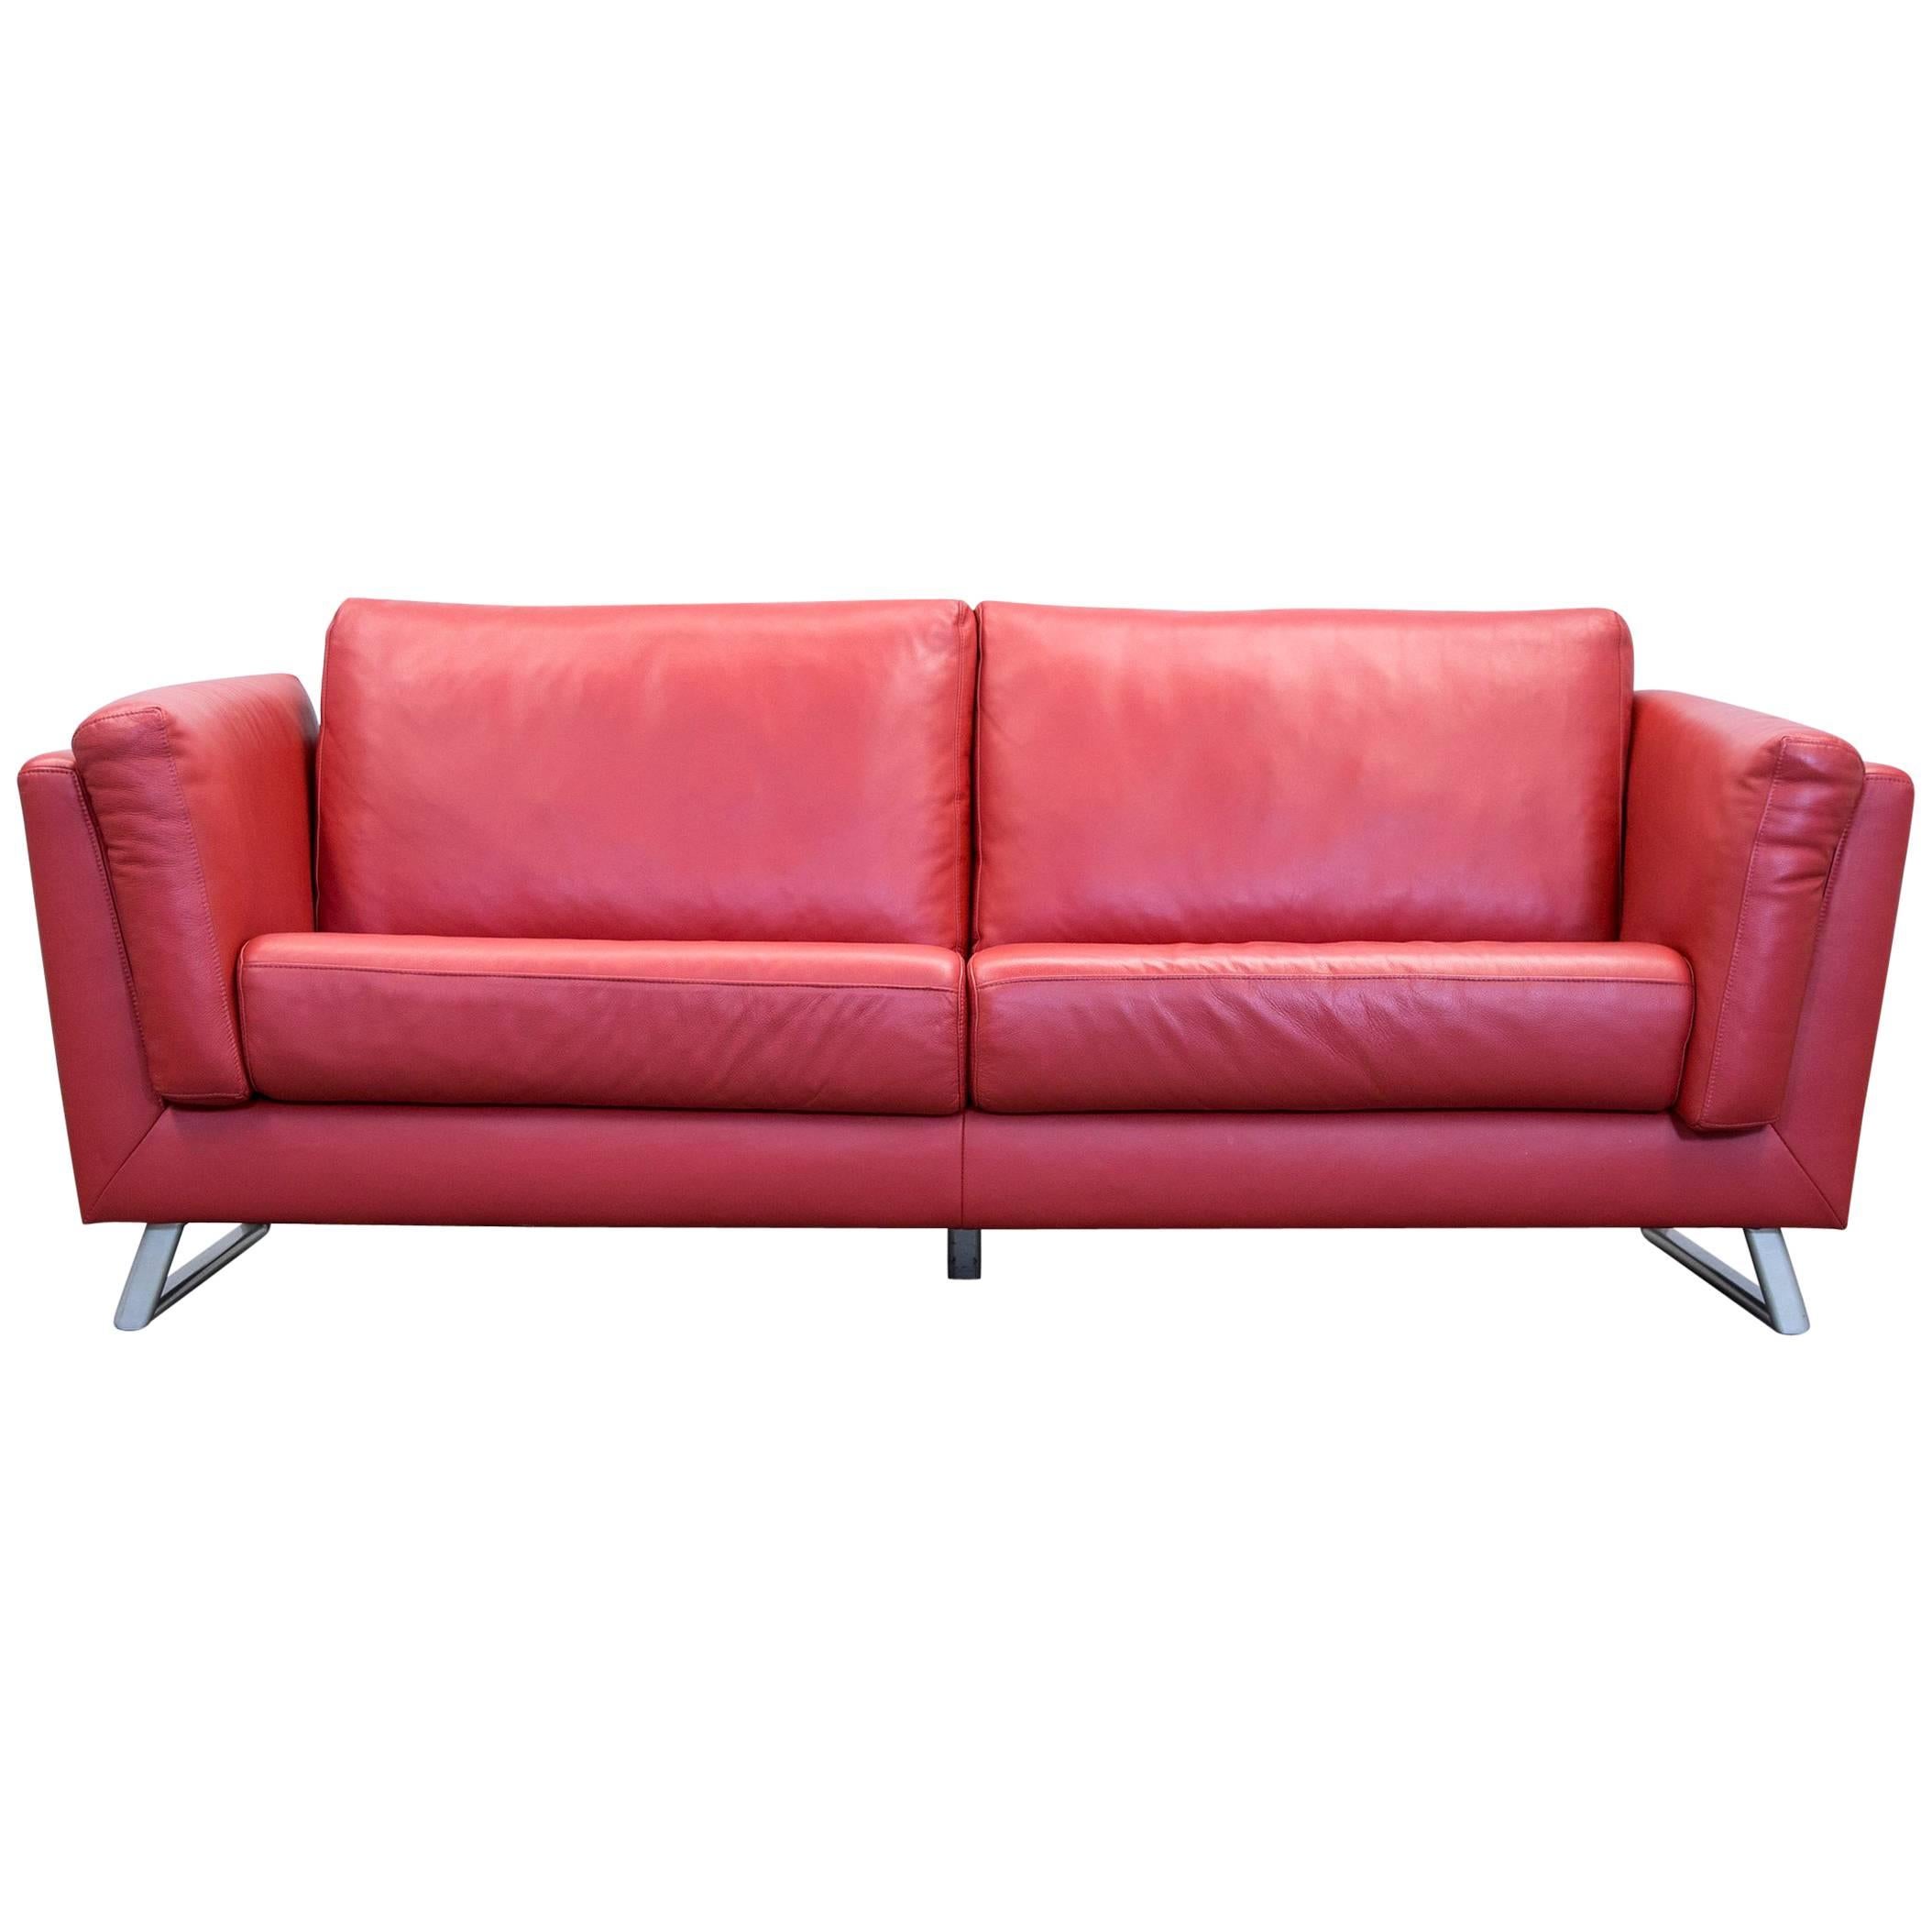 Designer Sofa Leather Red Three-Seat Couch Modern For Sale